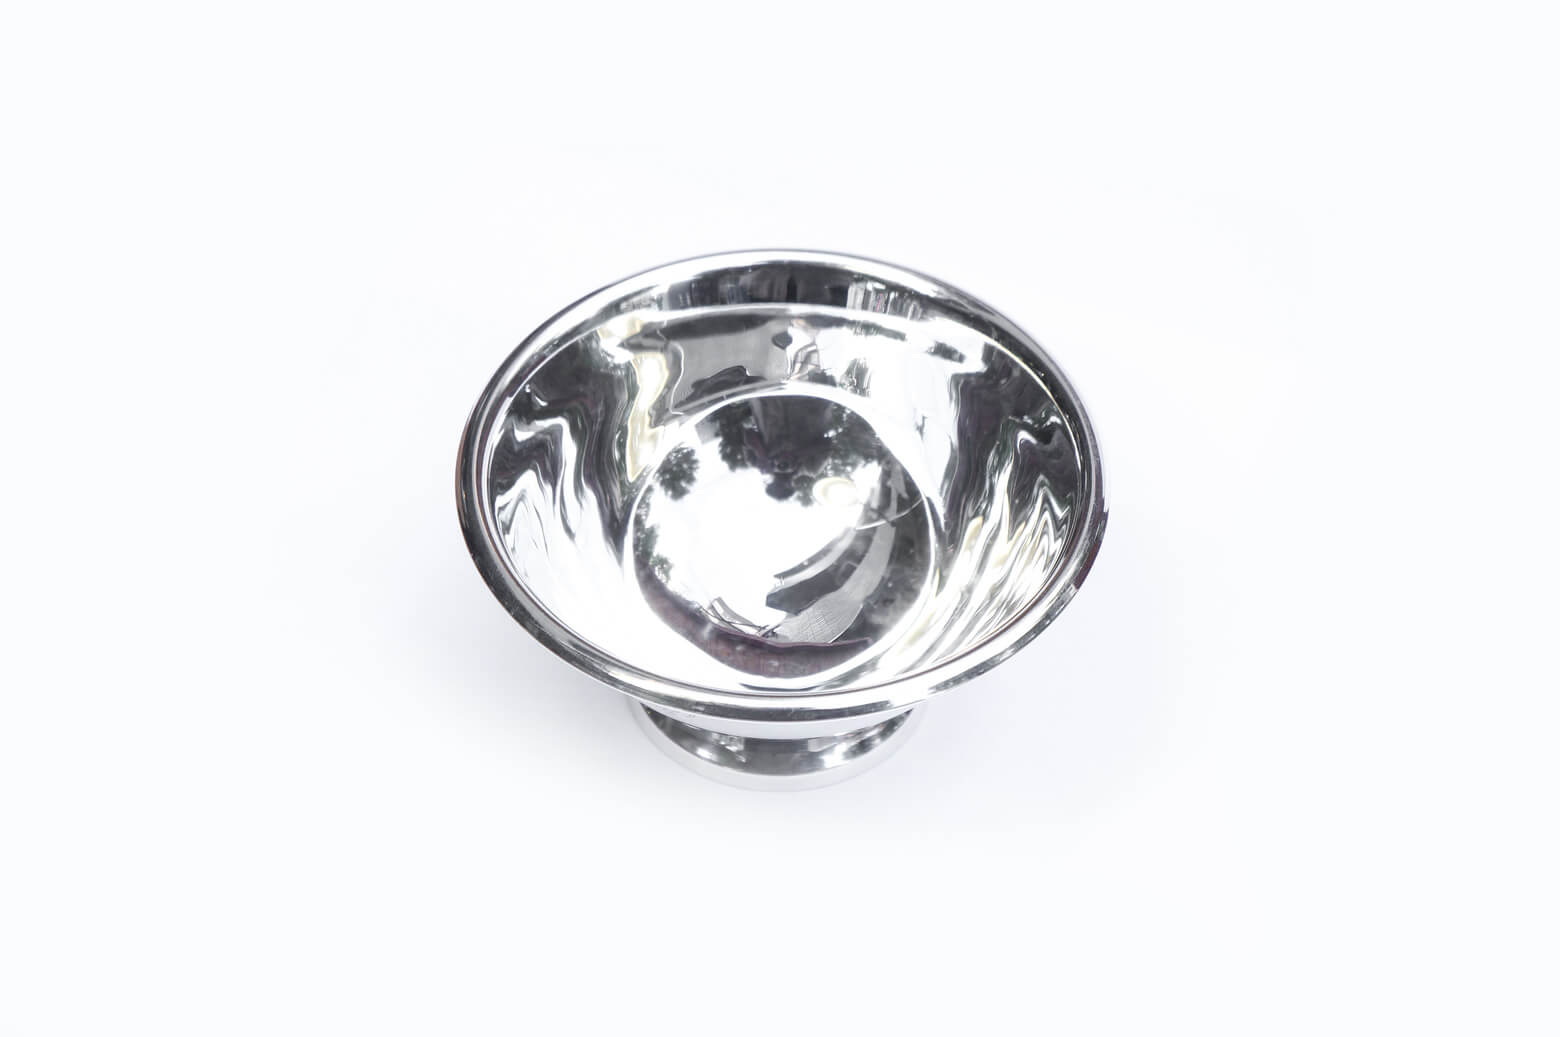 Casual Product Stainless Steel Sugar Bowl/カジュアル プロダクト ステンレス シュガーボウル キッチン雑貨 1